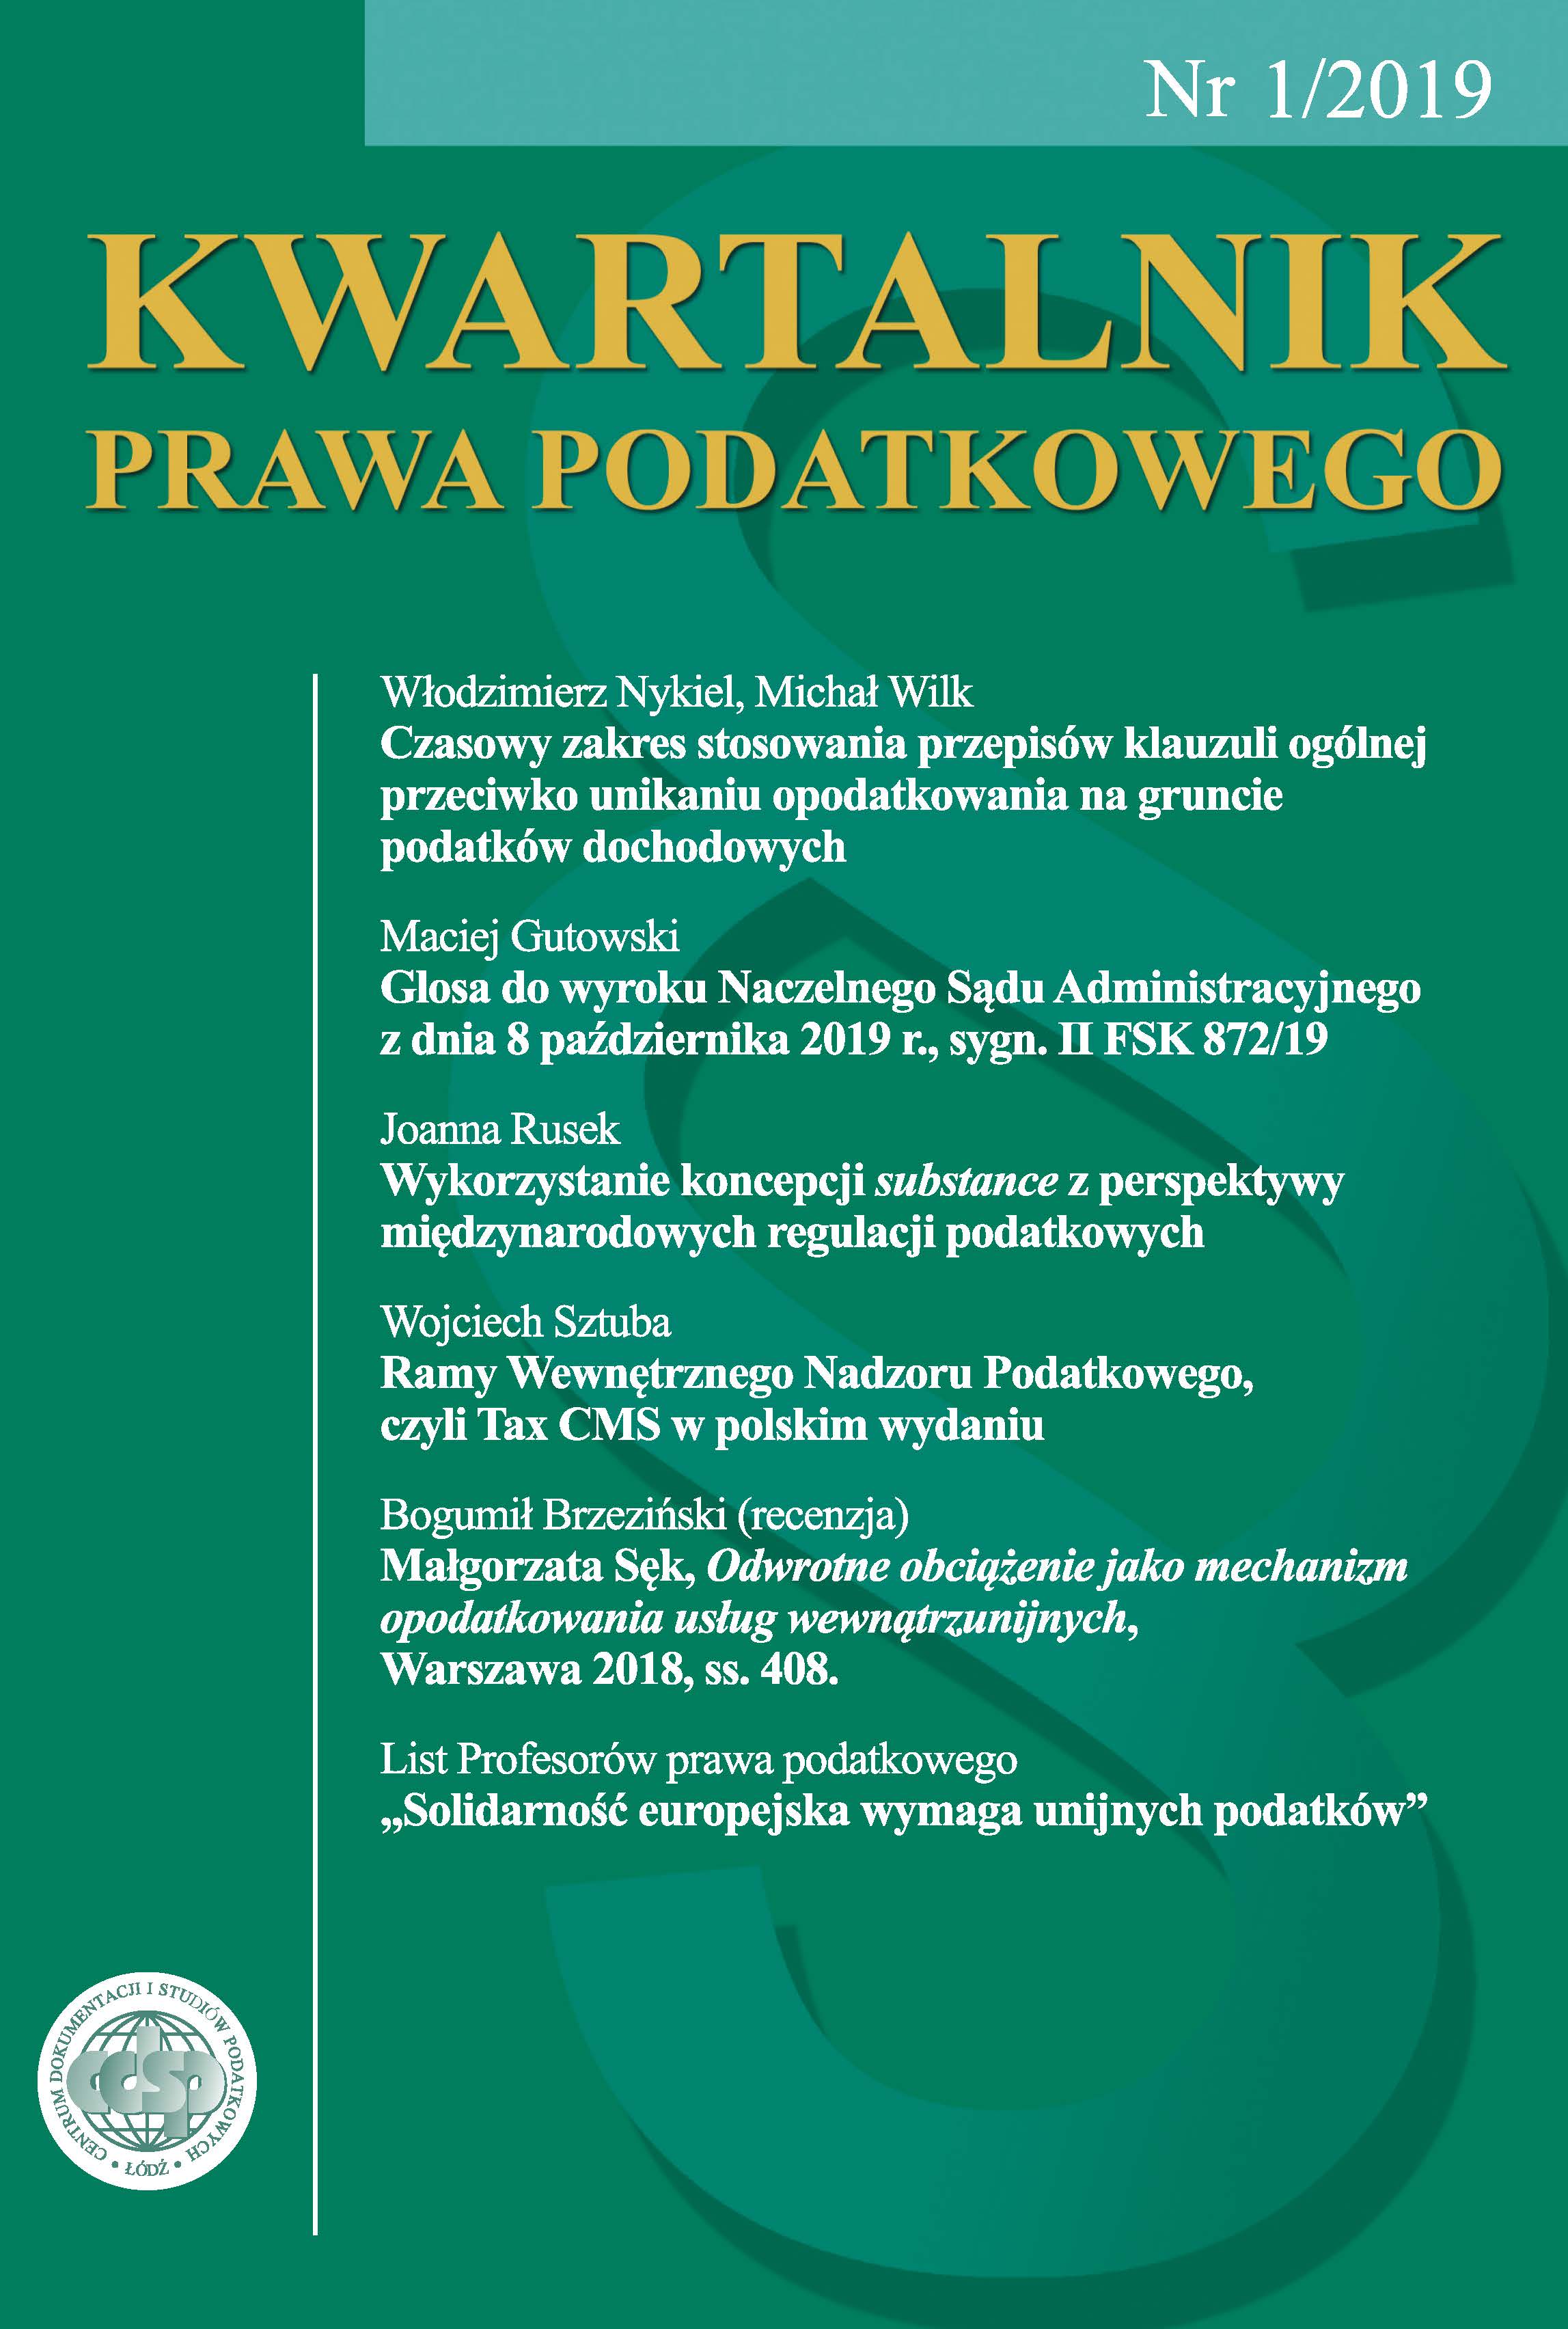 Commentary on the judgement of the Polish Supreme Administrative Court issued on 8th October 2019, II FSK 872/19 Cover Image